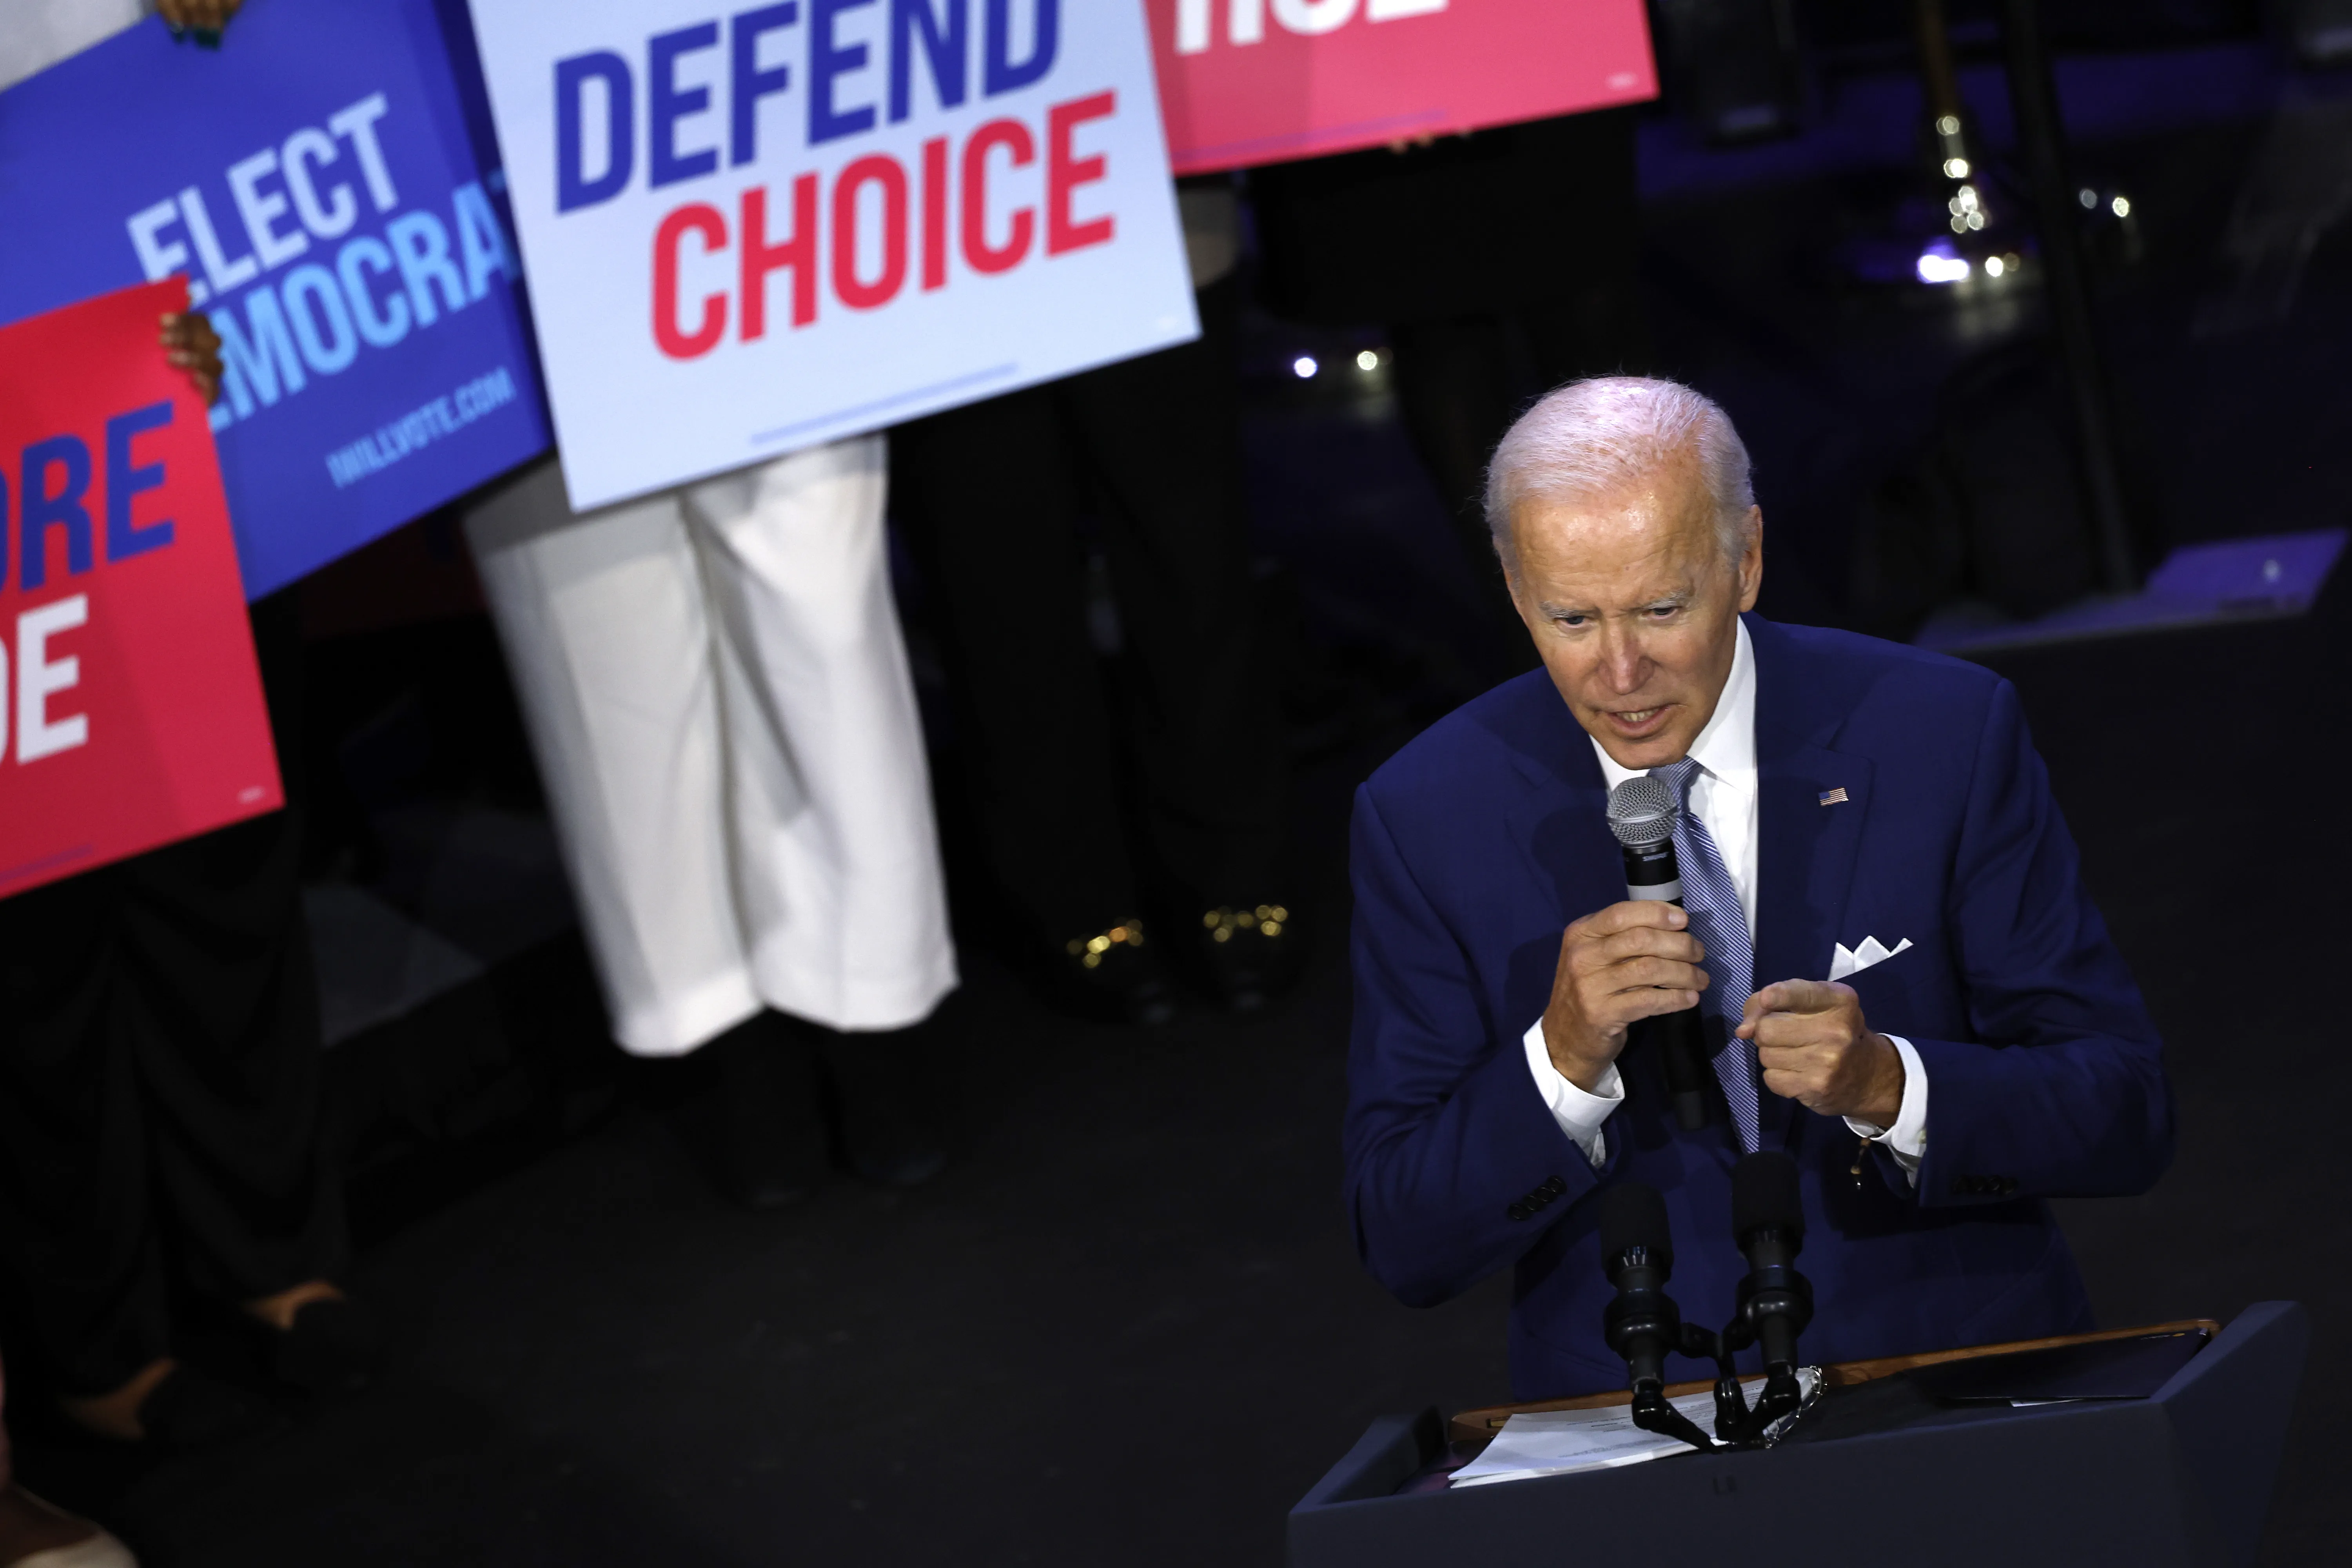 President Joe Biden speaks at a Democratic National Committee event at the Howard Theatre on Oct. 18, 2022, in Washington, D.C. With three weeks until Election Day, in his remarks Biden highlighted issues pertaining to women’s reproductive health and promised to codify access to abortion.?w=200&h=150